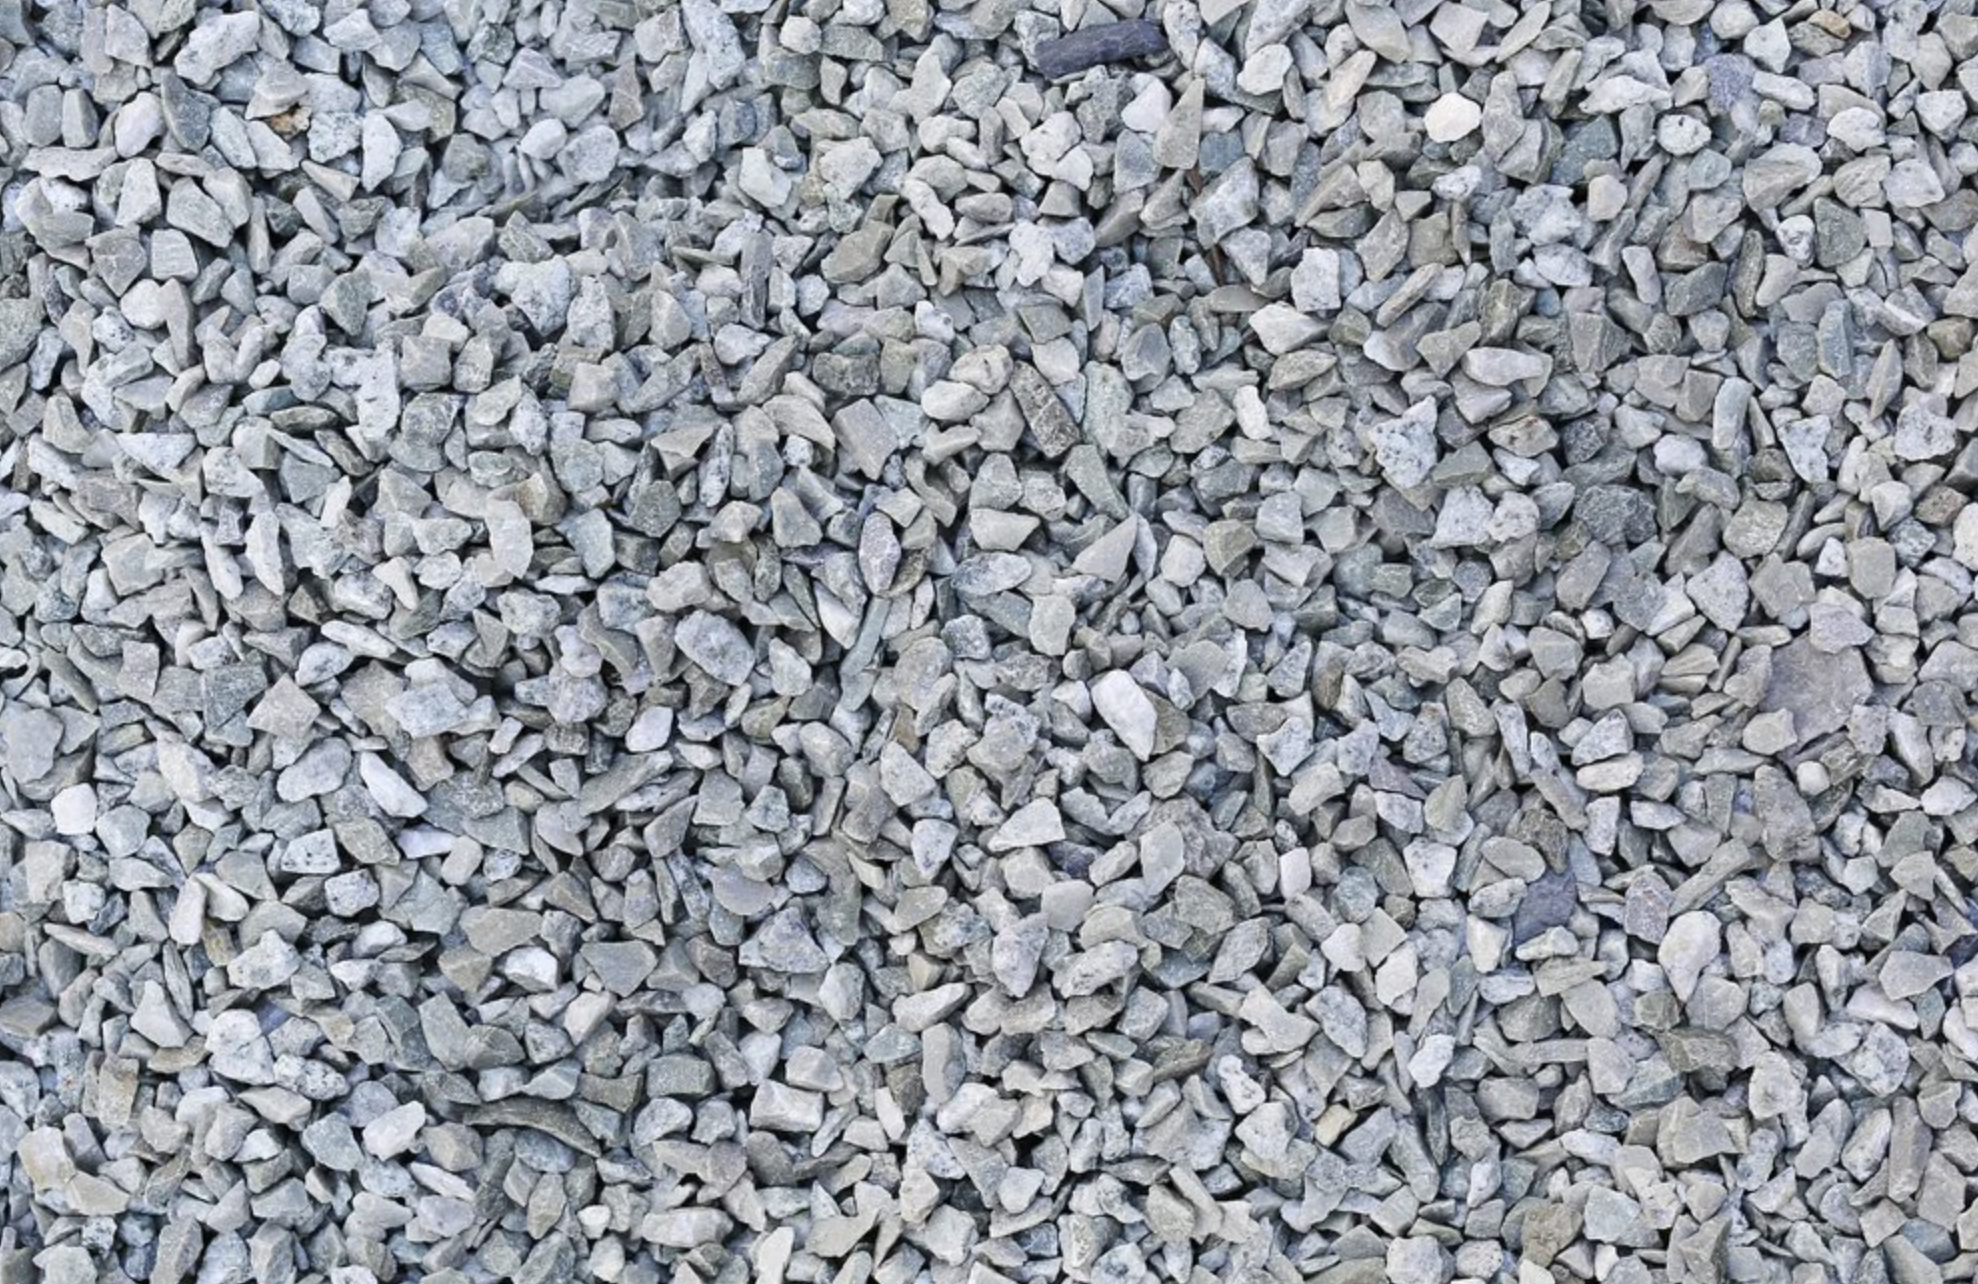 Gravel supply in Lehigh Valley, PA